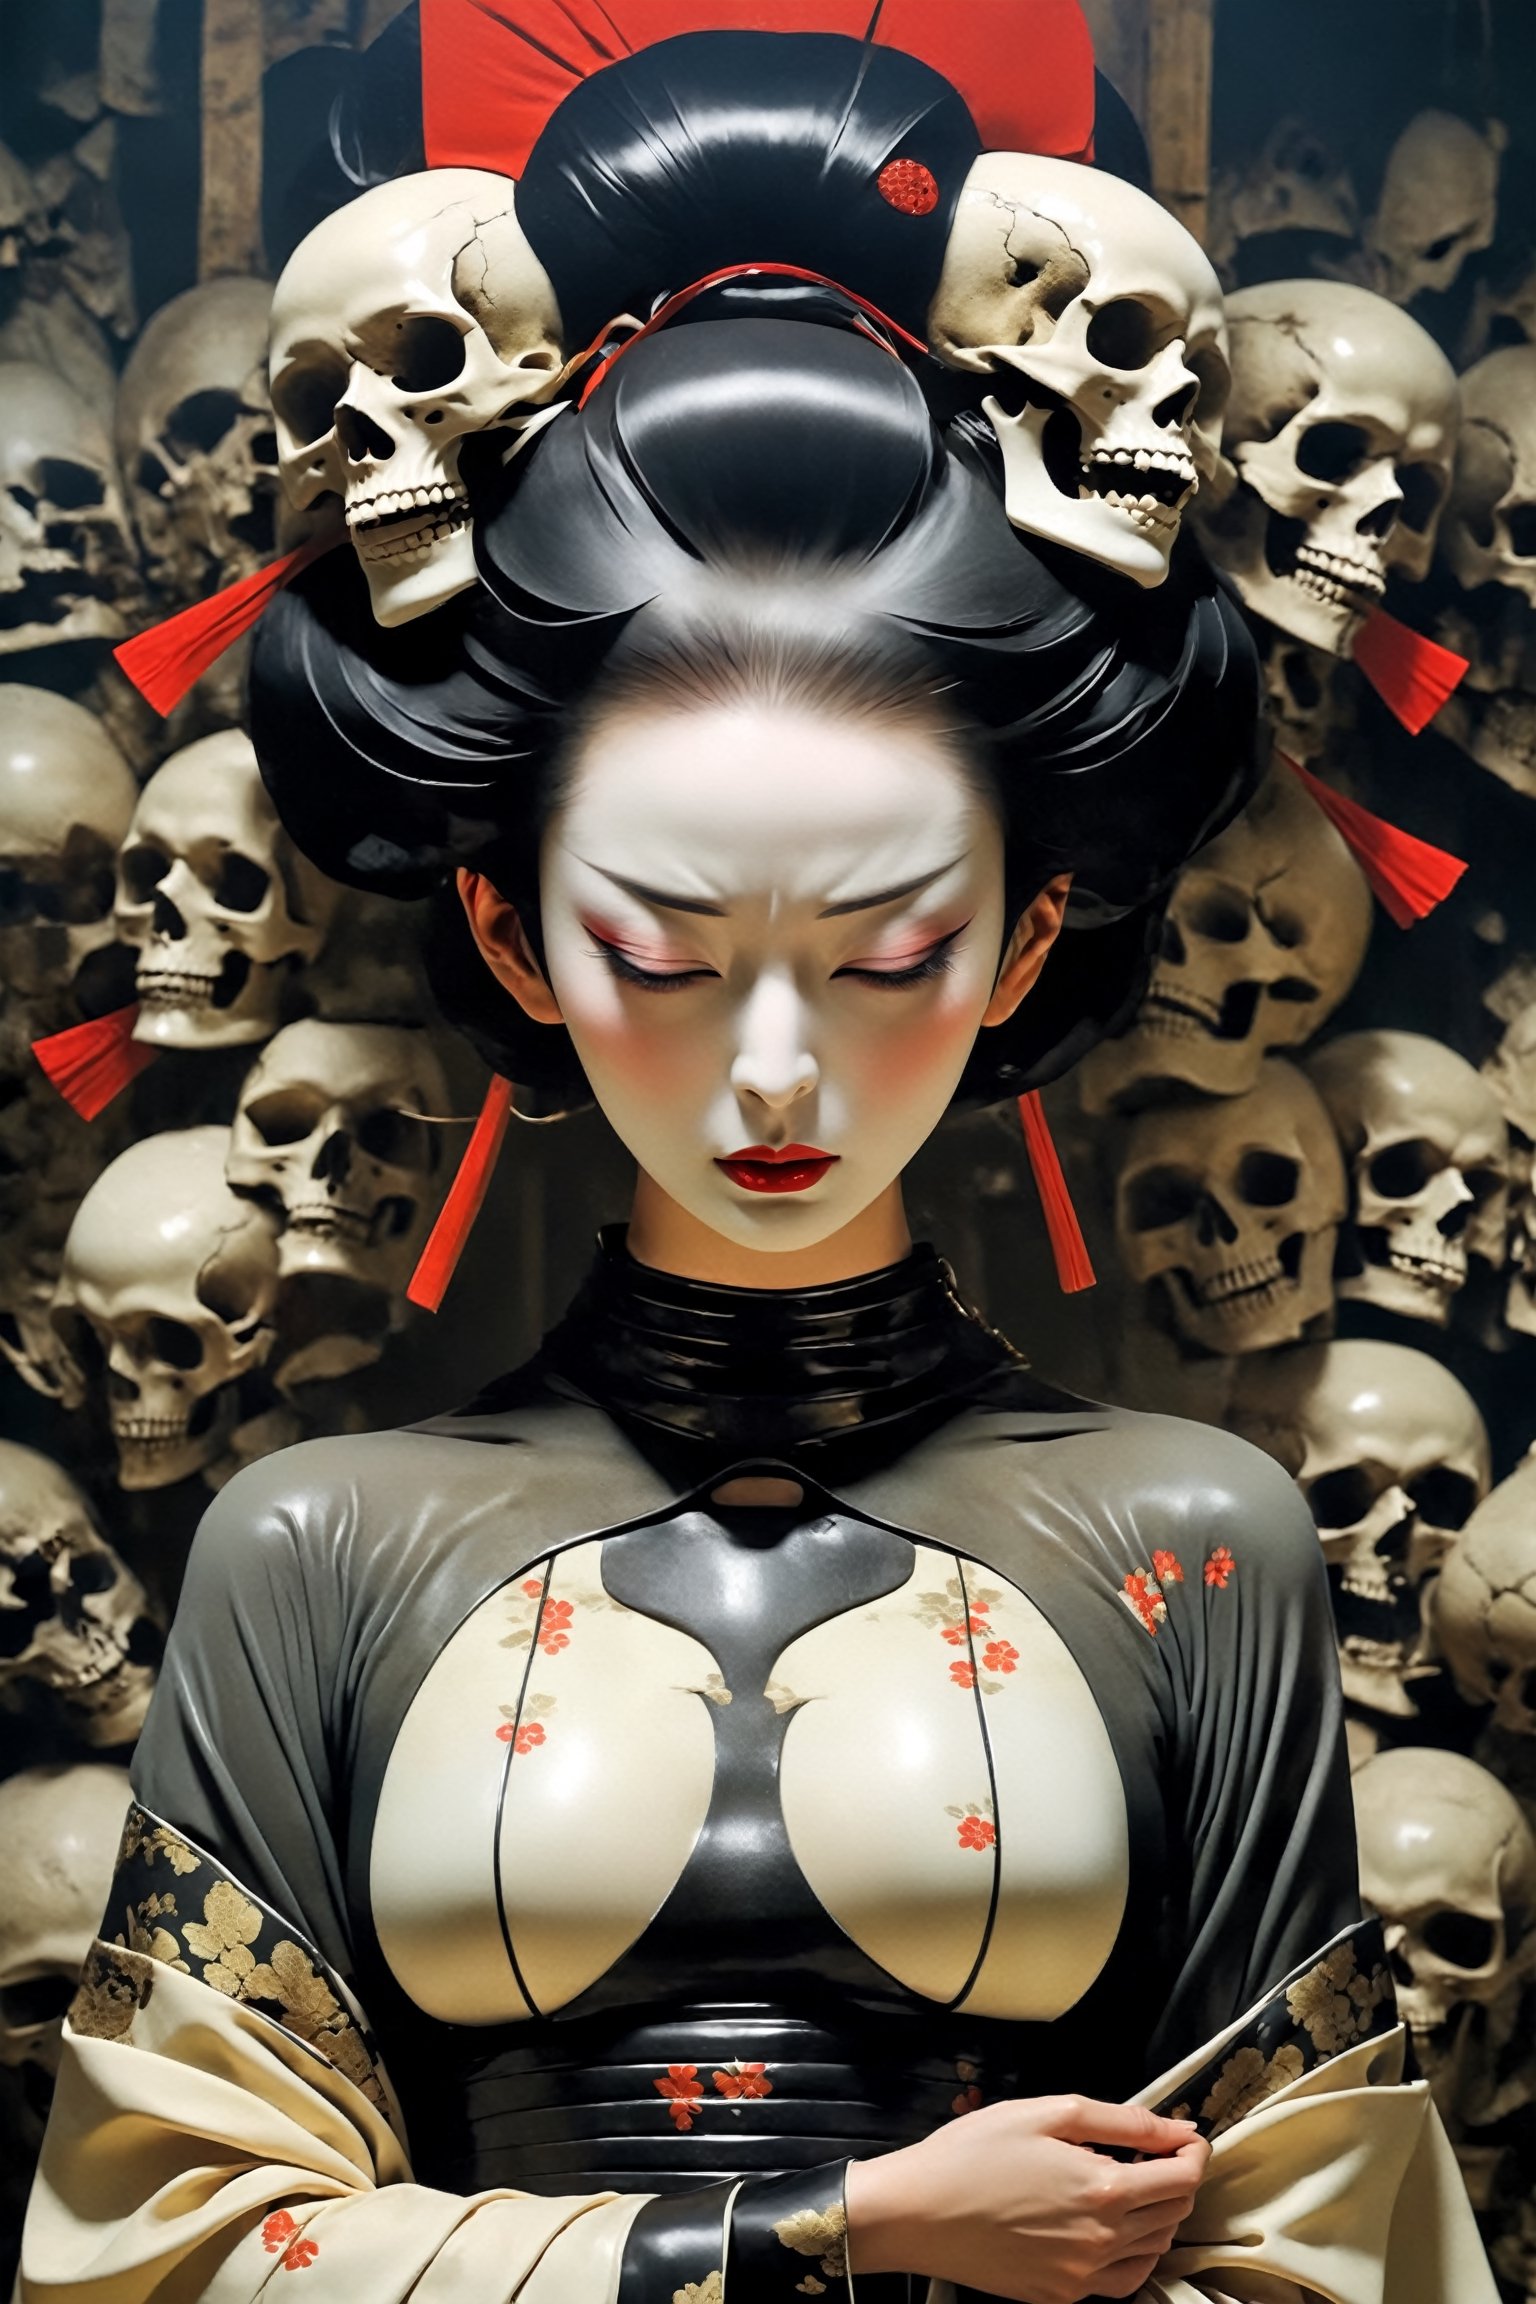 poster of a sexy  geisha [suffering,  burdened by the weight of a deception, burden]  in a  [throne of bones ], ,  very_high_resolution, latex clothing uniform, eye angle view,  , designed by  Dave Mckean,aw0k nsfwfactory,aw0k magnstyle,danknis,sooyaaa,Anime ,IMGFIX

,kwon-nara-xl